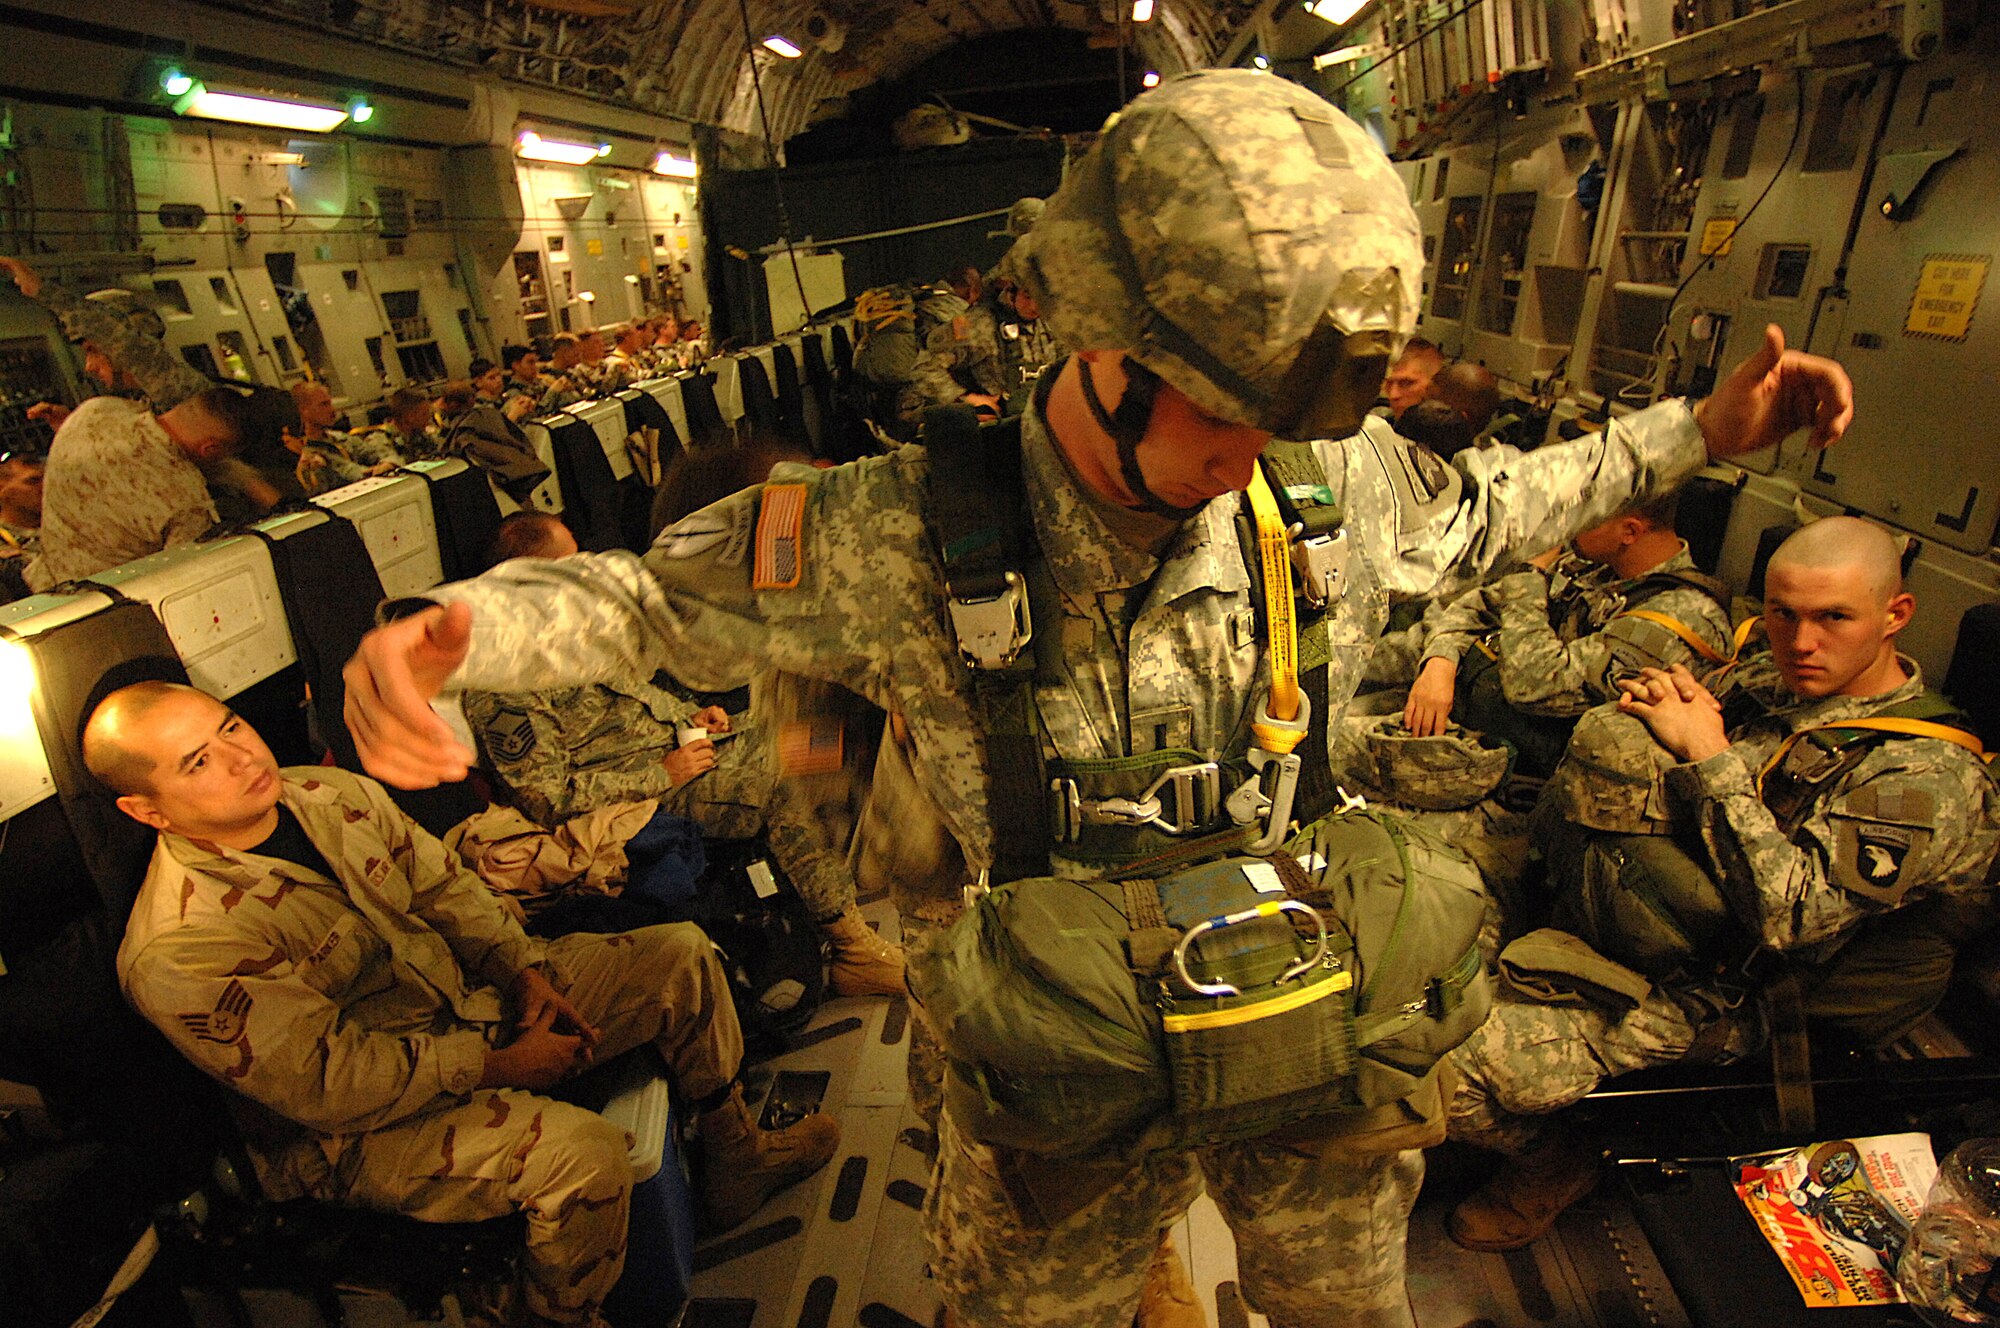 U.S. Army paratroopers from the 20th Engineering Brigade, 101st Airborne Division, Fort Campbell, Ky., and Egyptian paratroopers prepare their chutes aboard a Charleston AFB C-17 aircraft for an air drop into Cairo, Egypt, Nov. 7 as part of exercise Bright Star 2007. (U.S Air Force photo/Staff Sgt. Aaron Allmon)